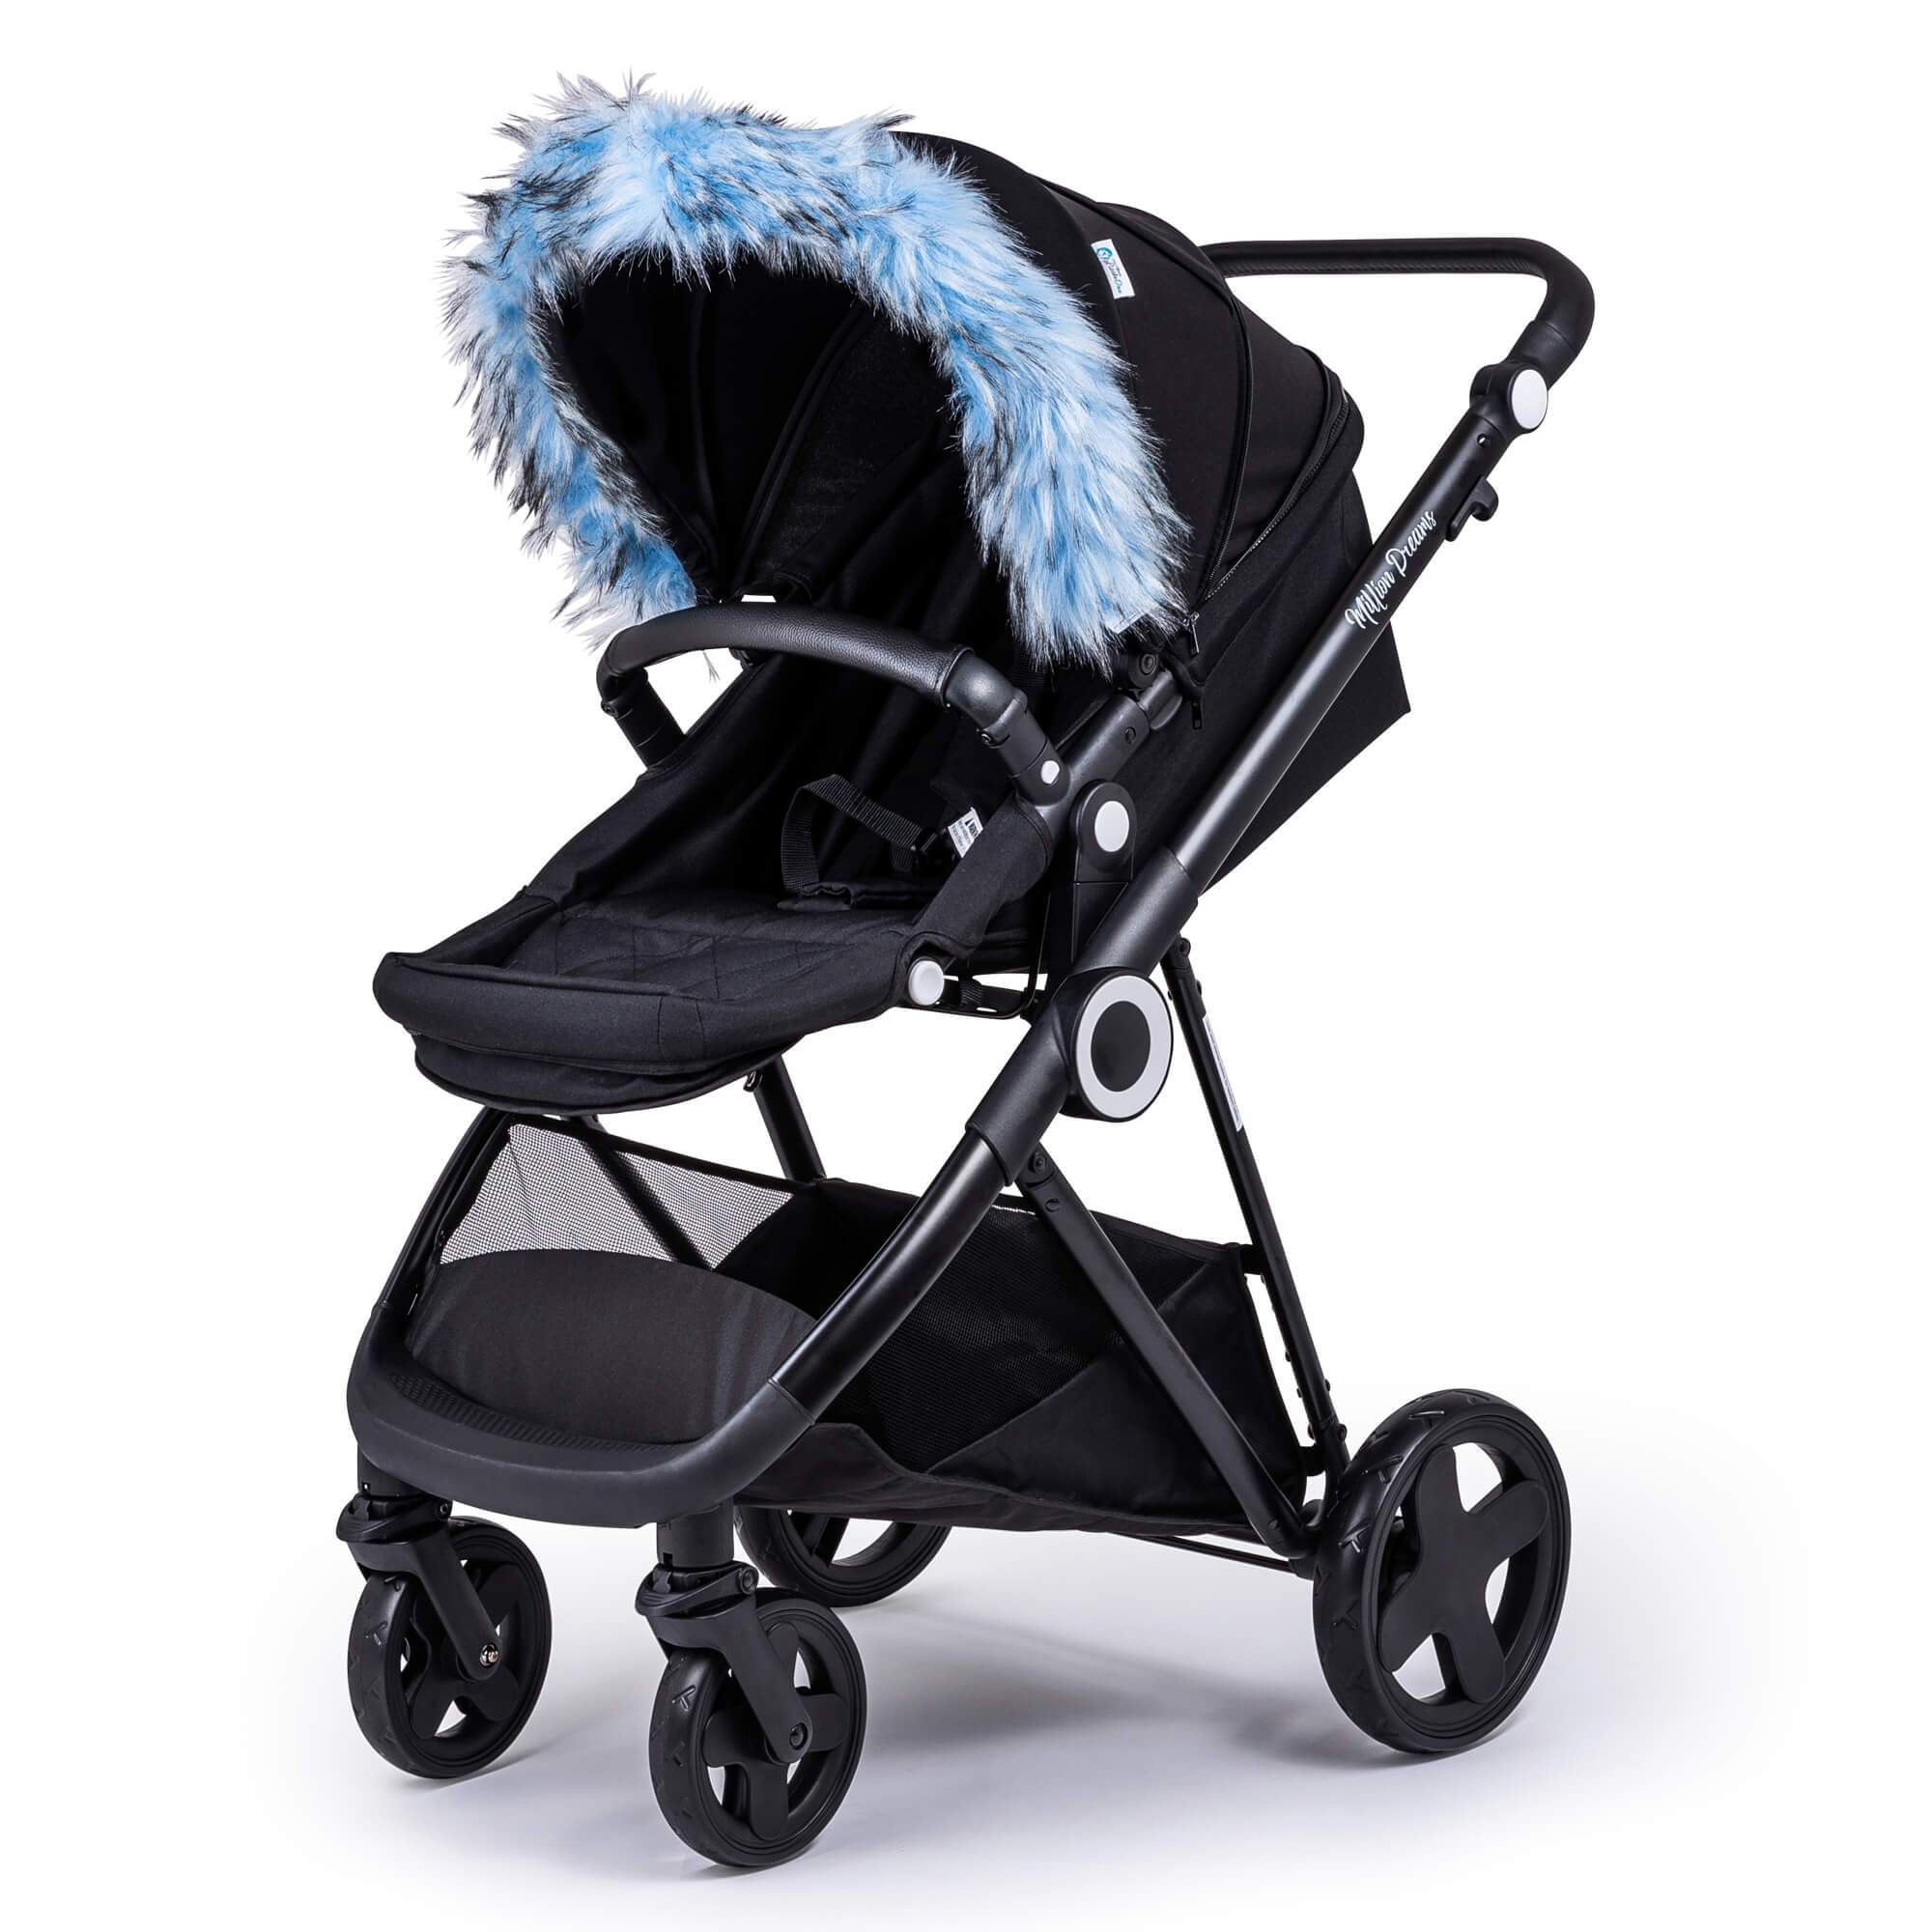 Pram Fur Hood Trim Attachment for Pushchair Compatible with Graco - Light Blue / Fits All Models | For Your Little One